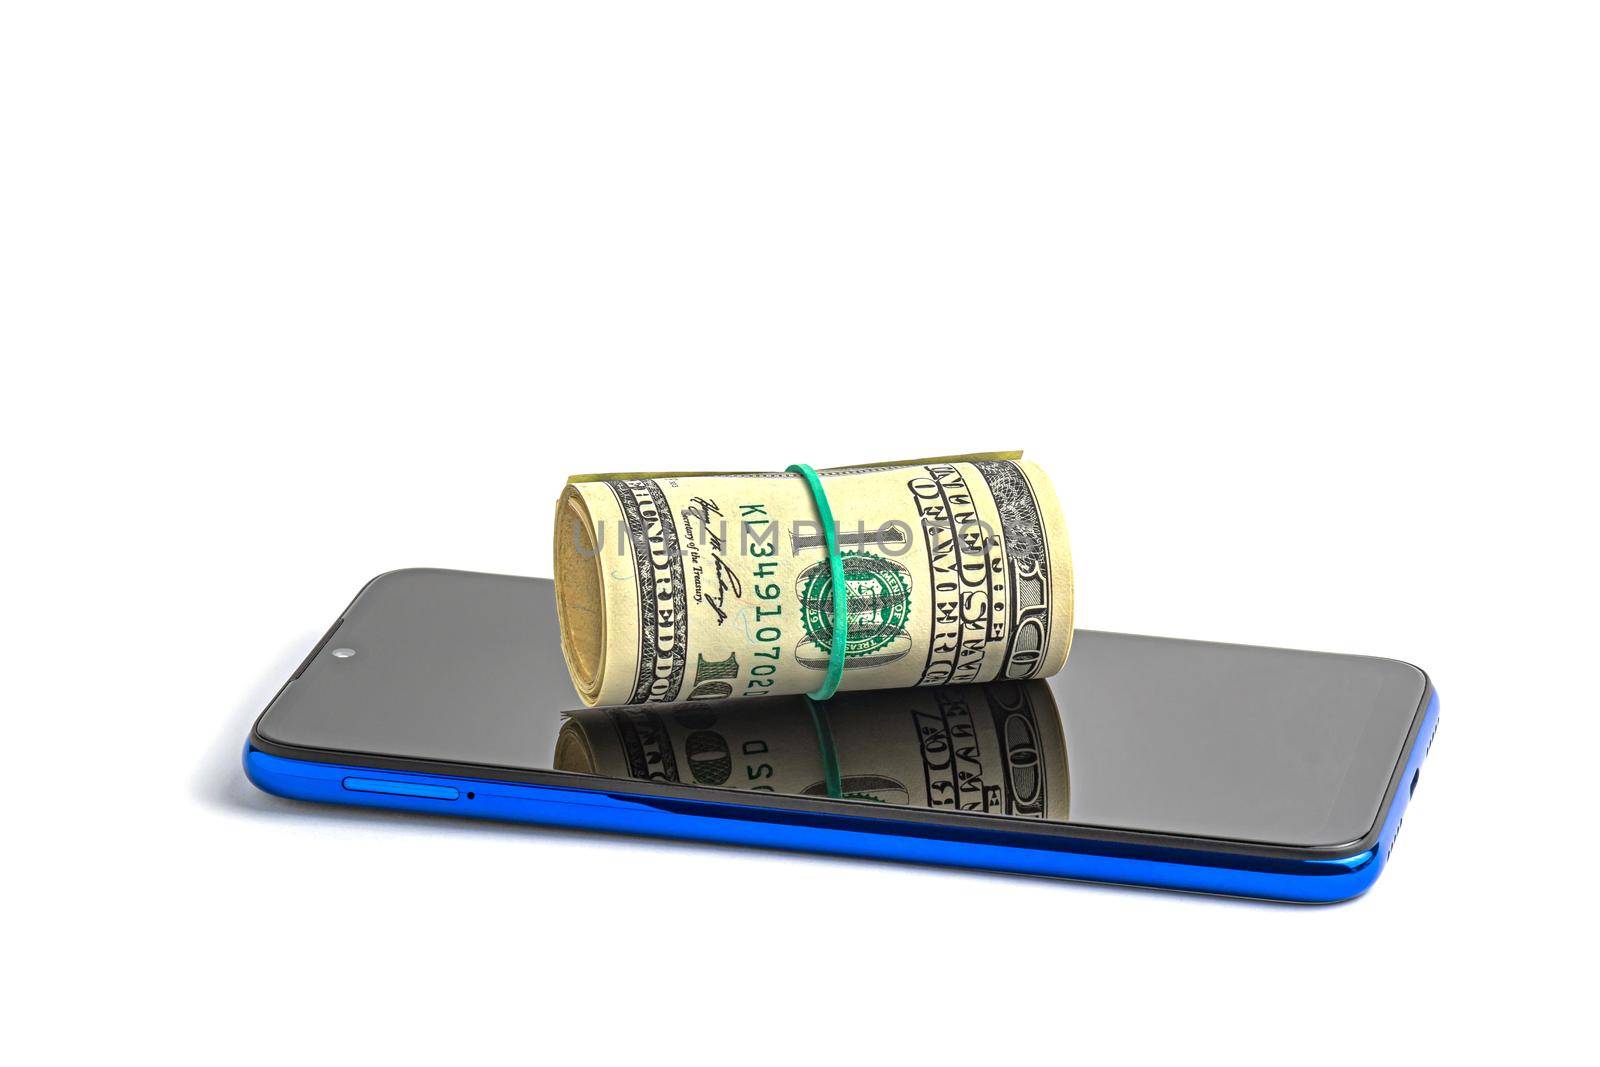 Money in a roll, tied with an elastic band, on the phone. The isolated object on a white background with a shadow. U.S. dollars. Phone and dollars isolated on white.